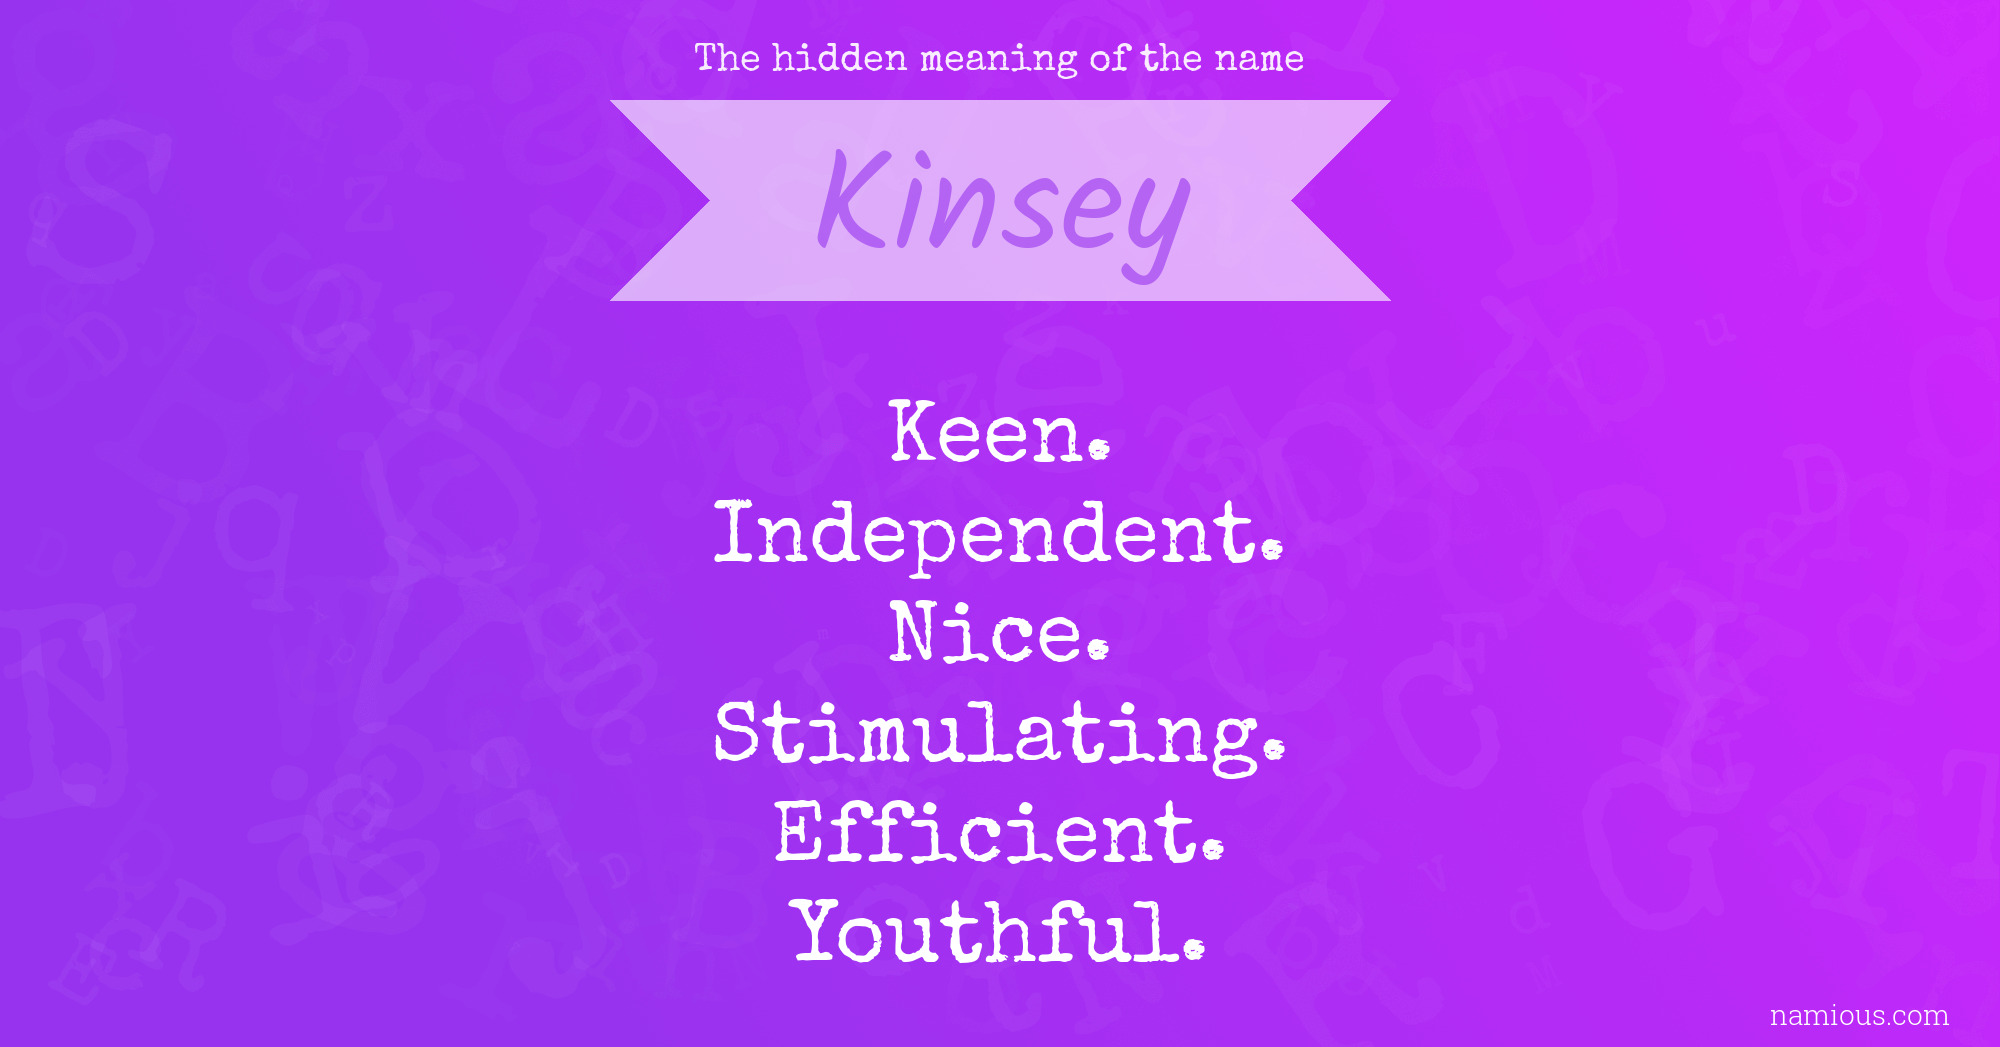 The hidden meaning of the name Kinsey